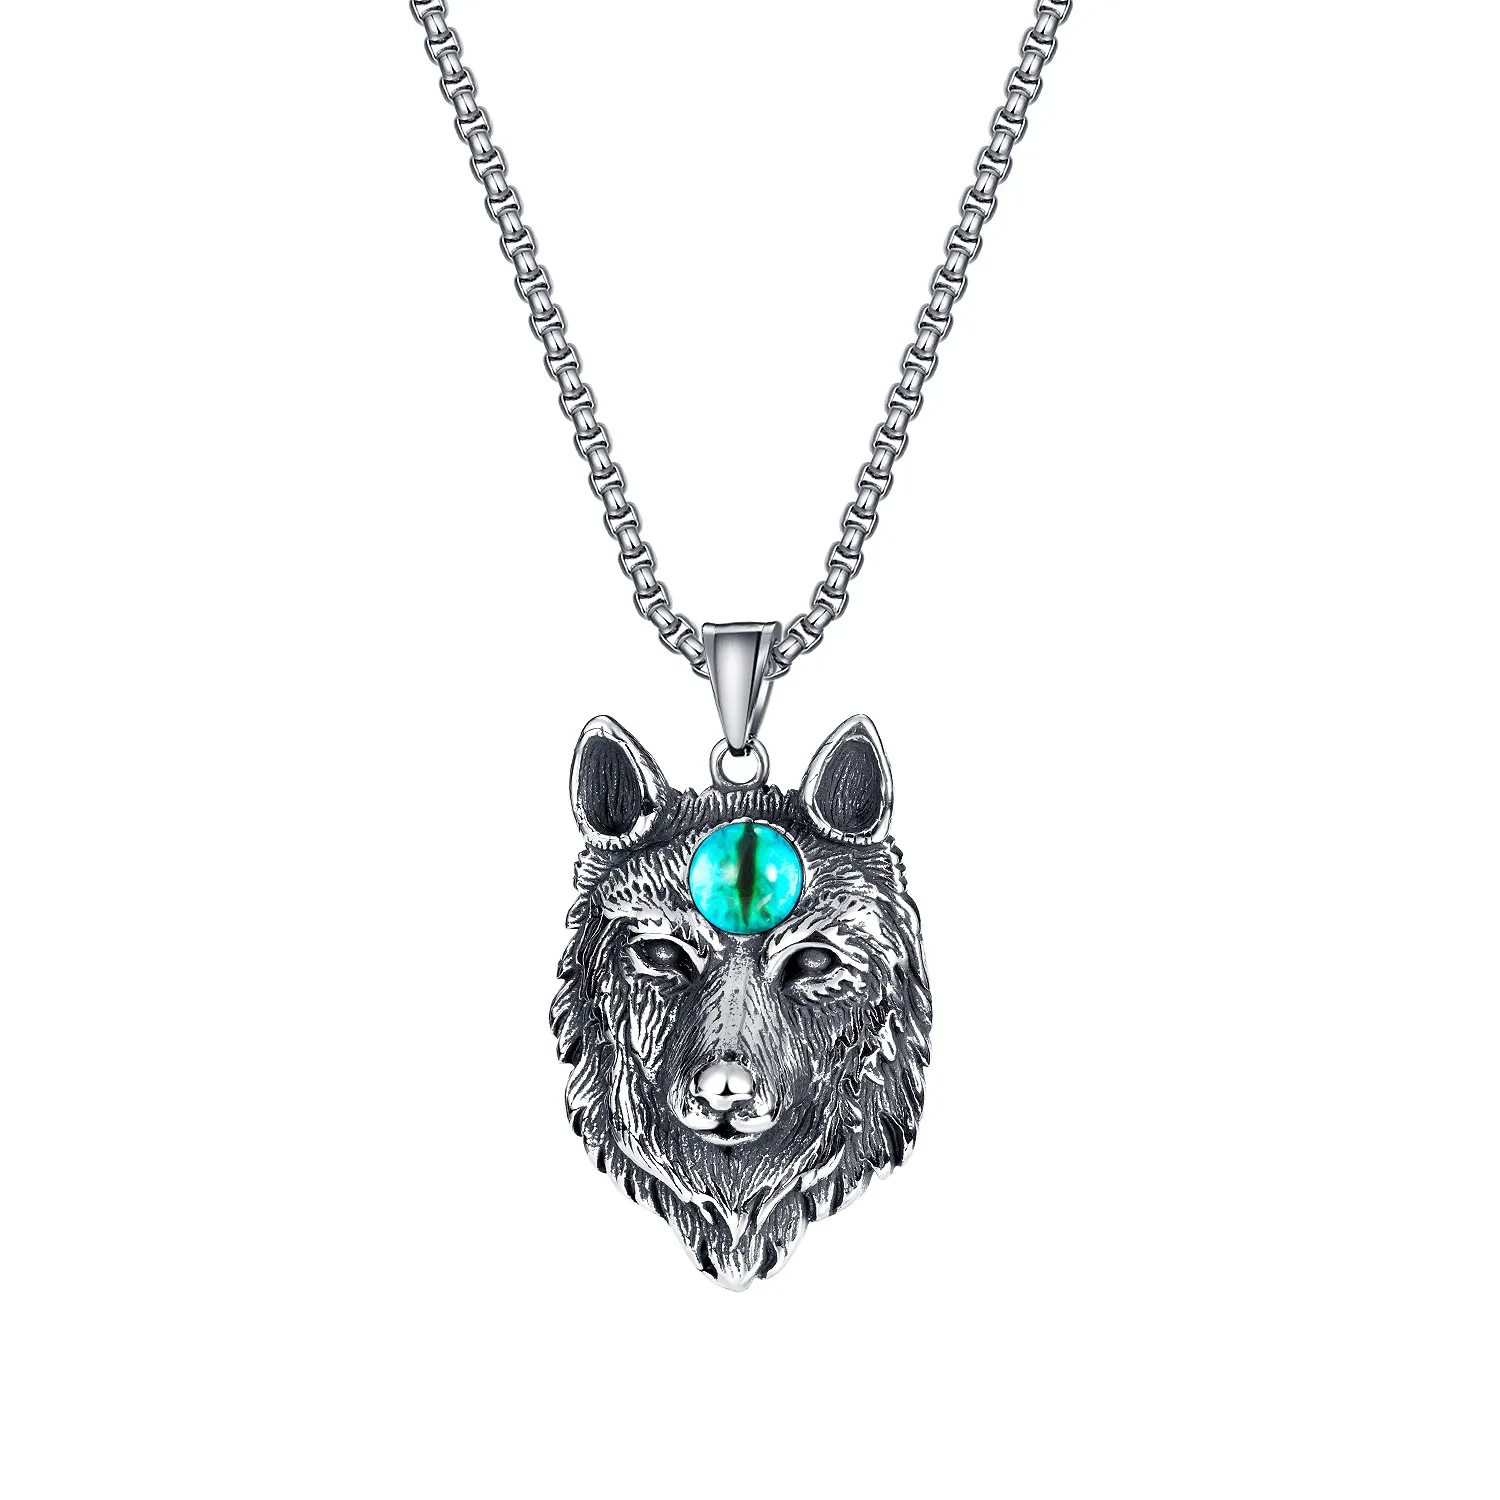 

DARHSEN Male Men Wolf Pendants Necklaces Stainless Steel 55/60cm Chain Party Gift Fashion Jewelry New Arrvial 2021